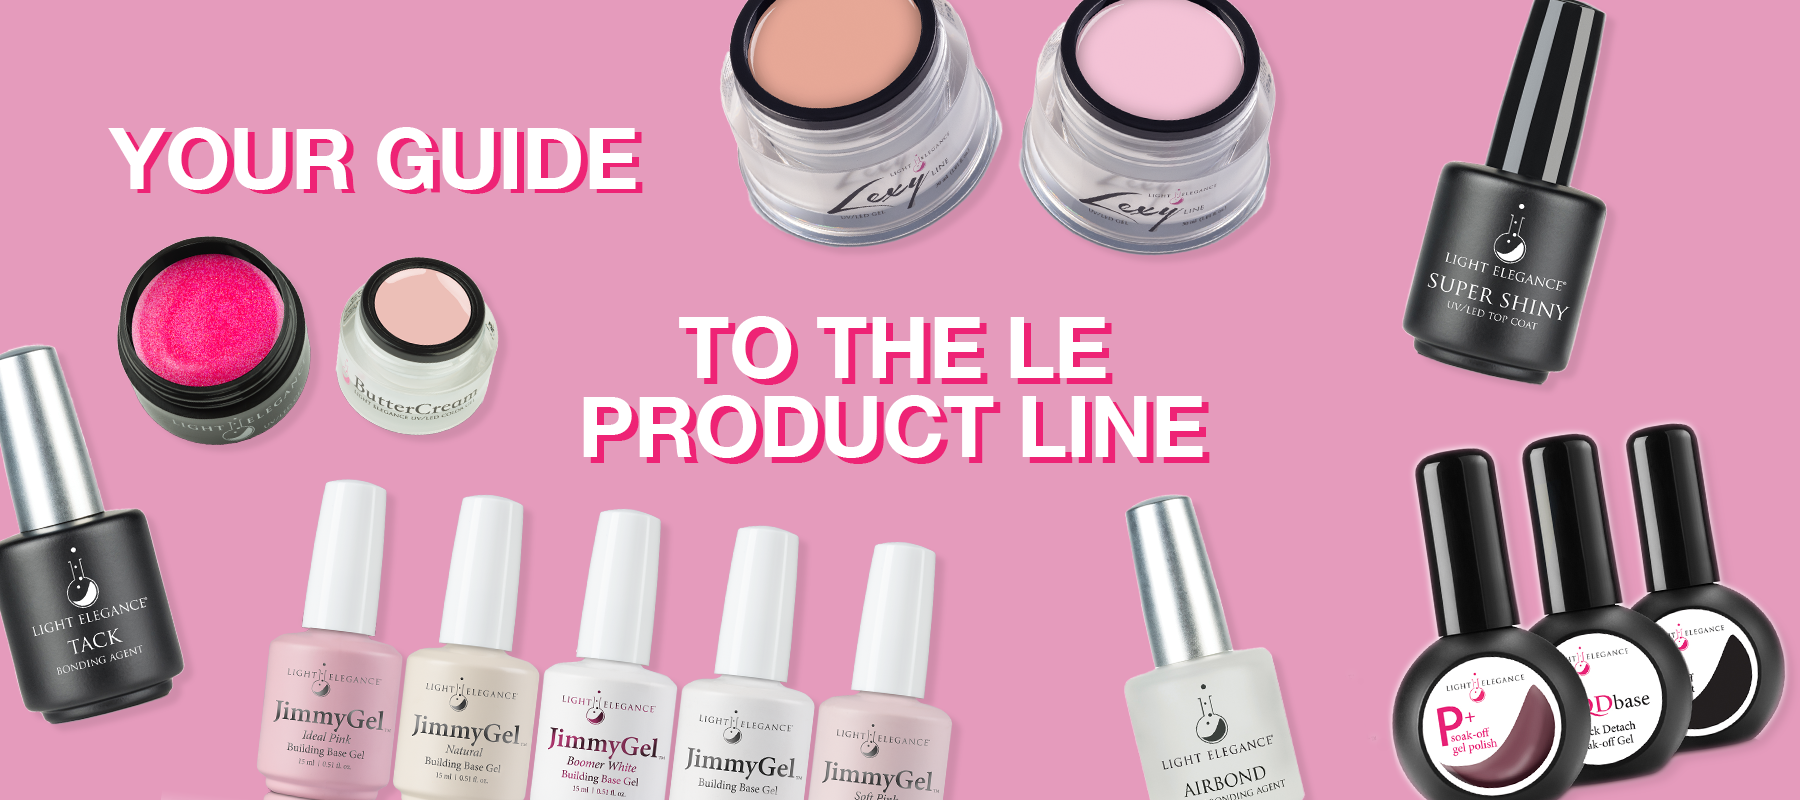 How to Get Started With LE | Your Guide to the Full LE Product Line - Bonding & Finishing, Structure Gels, Color Gel Products and More!